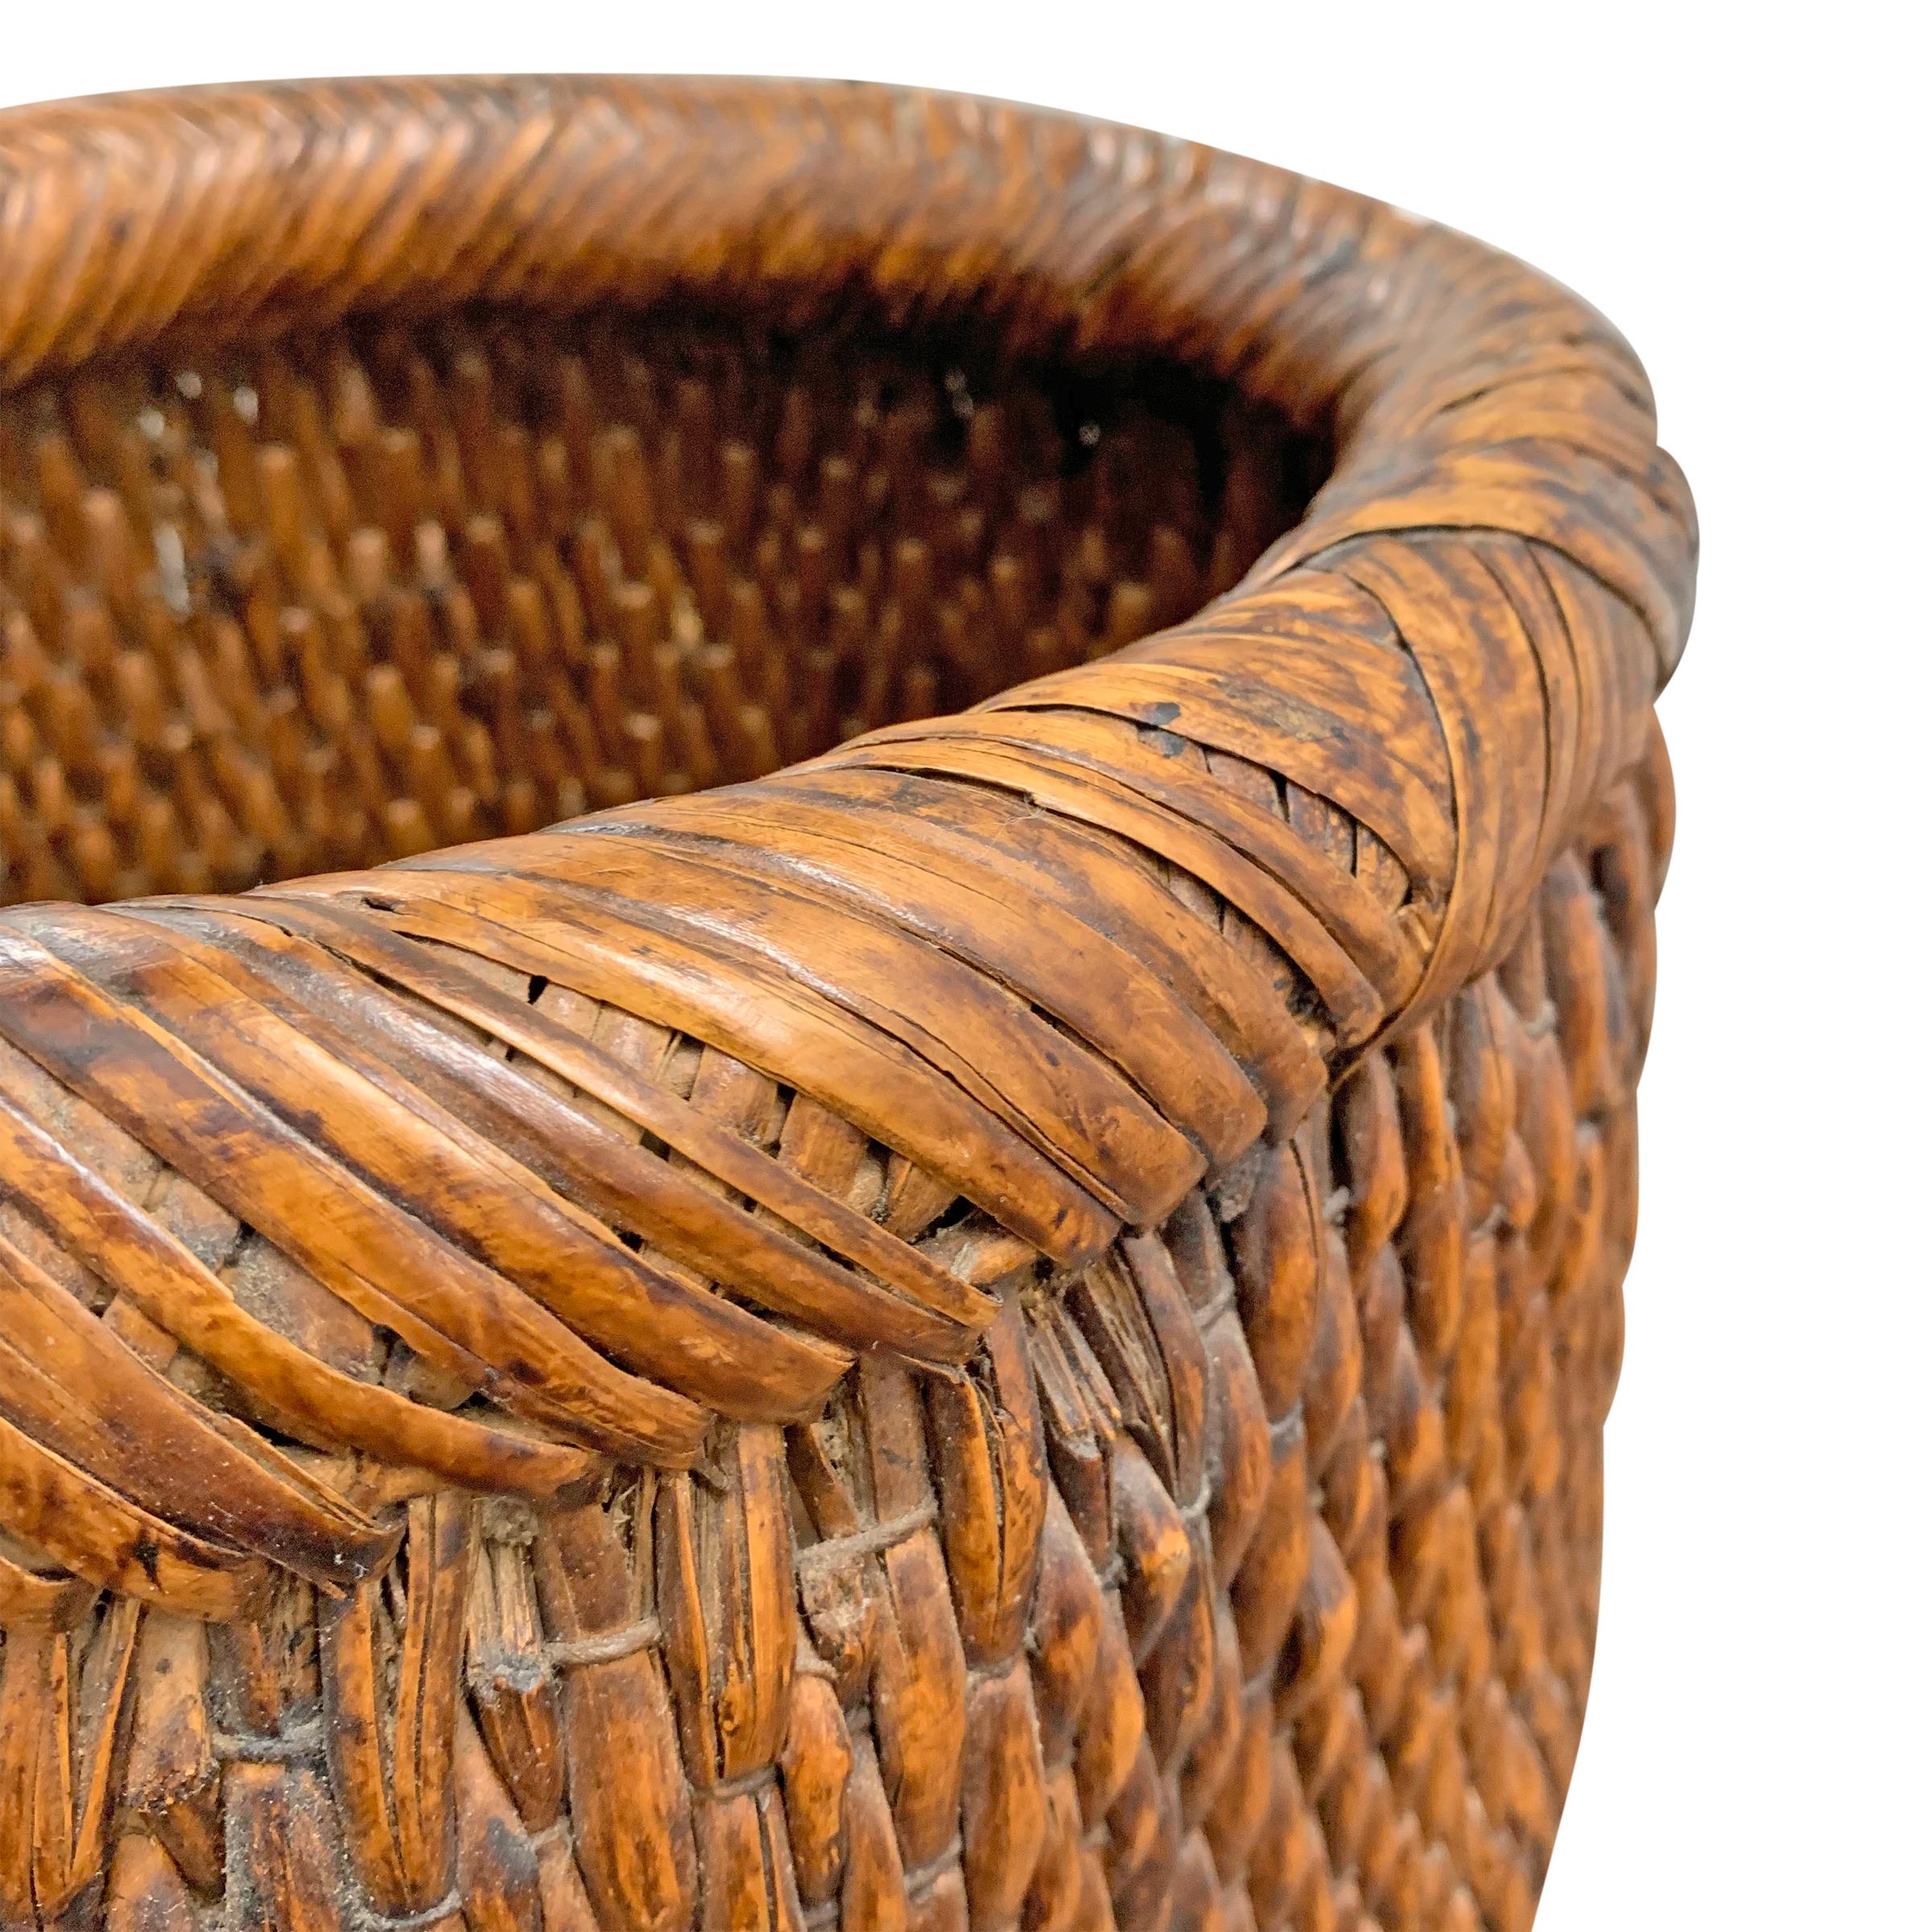 woven reed baskets